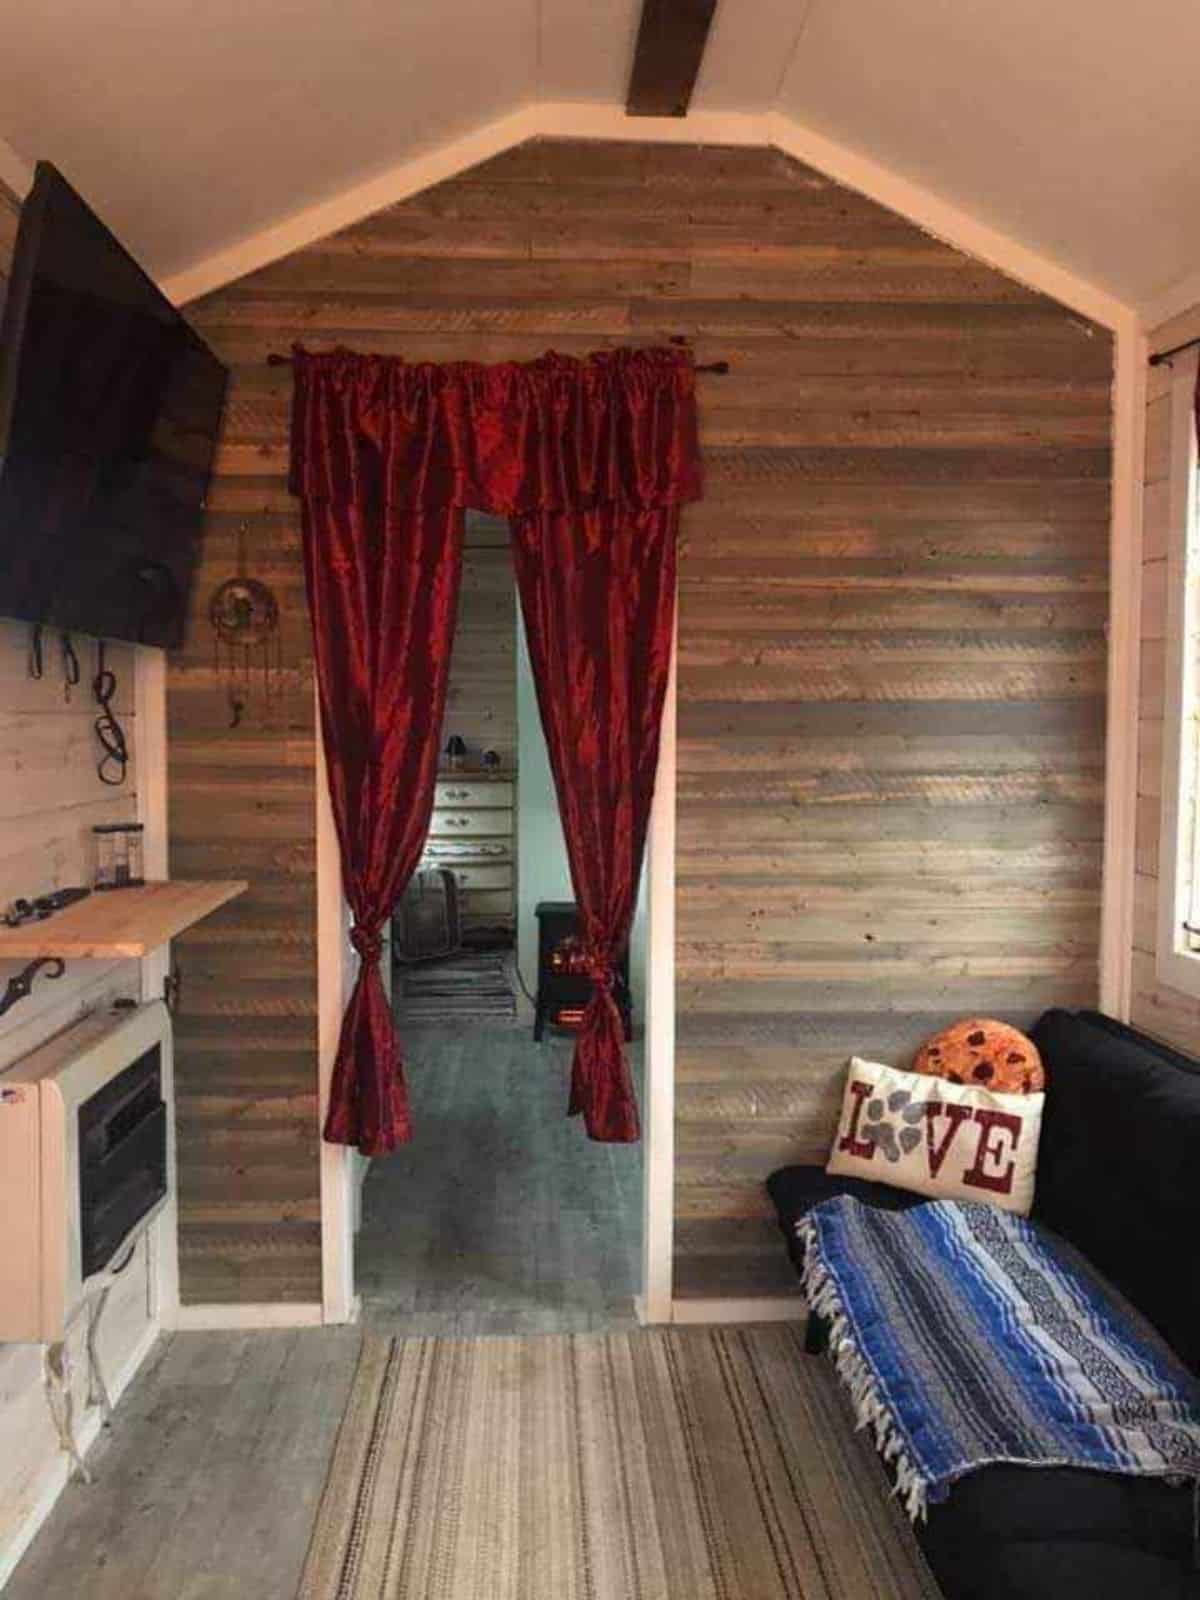 Wooden interiors of Rustic tiny home